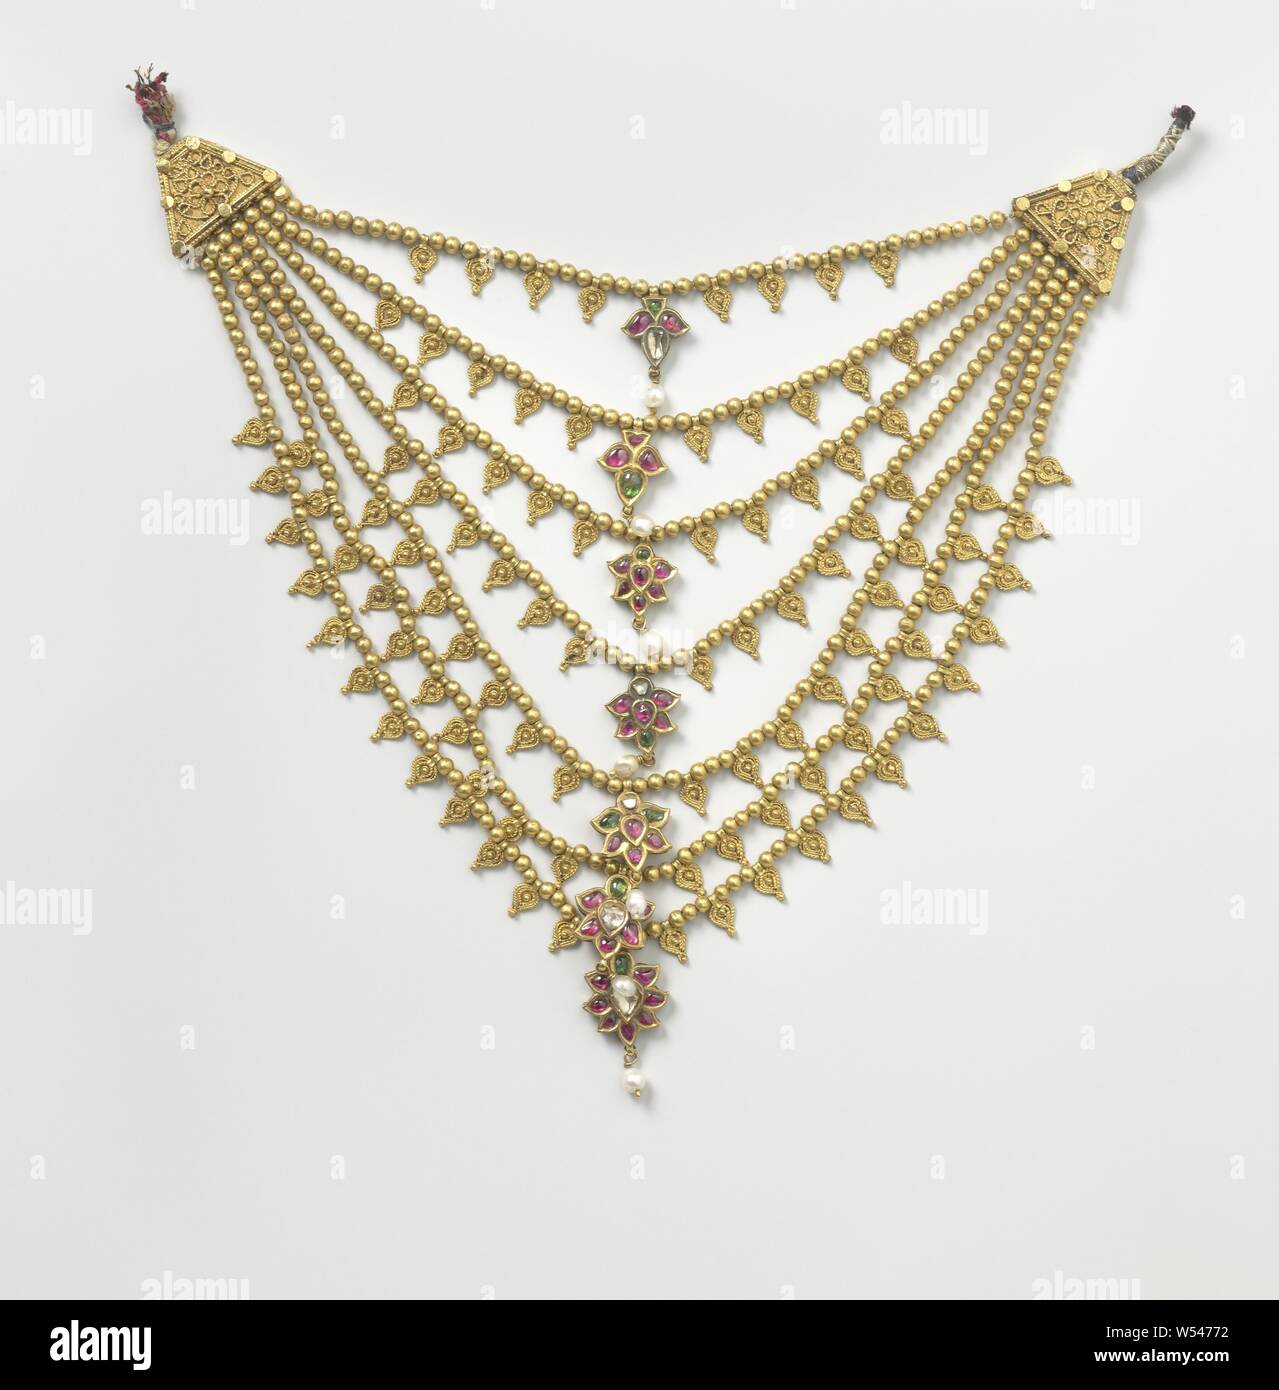 Necklace (candmala), A necklace (candmala) of gold consisting of seven cords. Each cord consists of a golden flower in the middle, inlaid with red and green stones and diamond splinters, supported by a cord of golden beads, interspersed with golden leaves and with a cap on both sides consisting of a filigree plate., anonymous, Surat, c. 1750, gold (metal), pearl, diamond (mineral), filigree, h 16.6 cm × w 16.5 cm Stock Photo